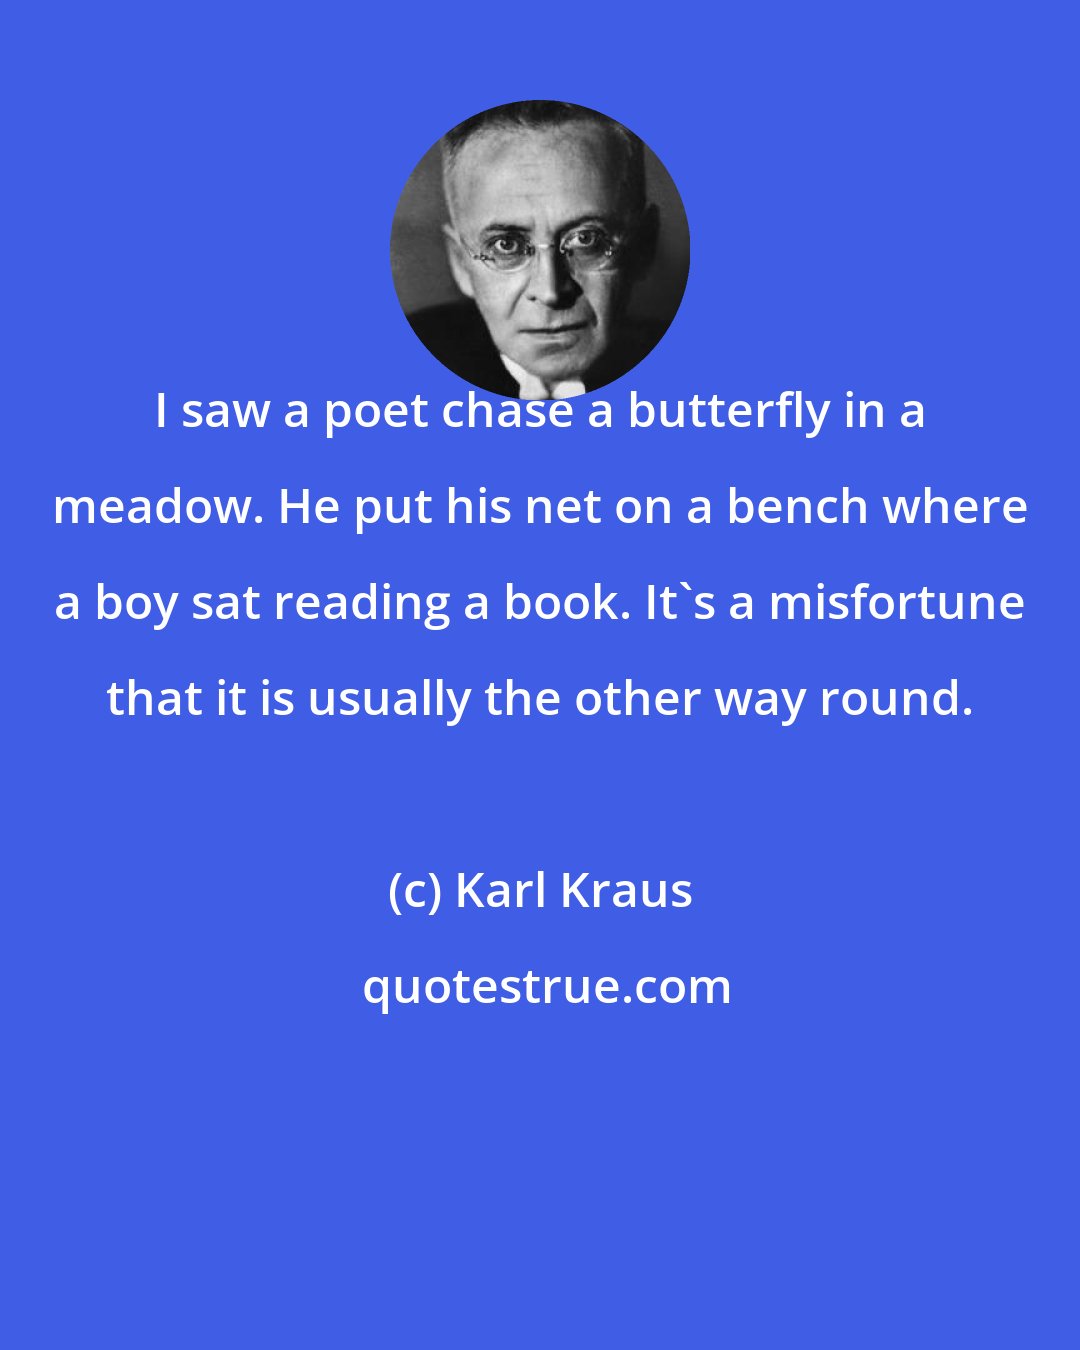 Karl Kraus: I saw a poet chase a butterfly in a meadow. He put his net on a bench where a boy sat reading a book. It's a misfortune that it is usually the other way round.